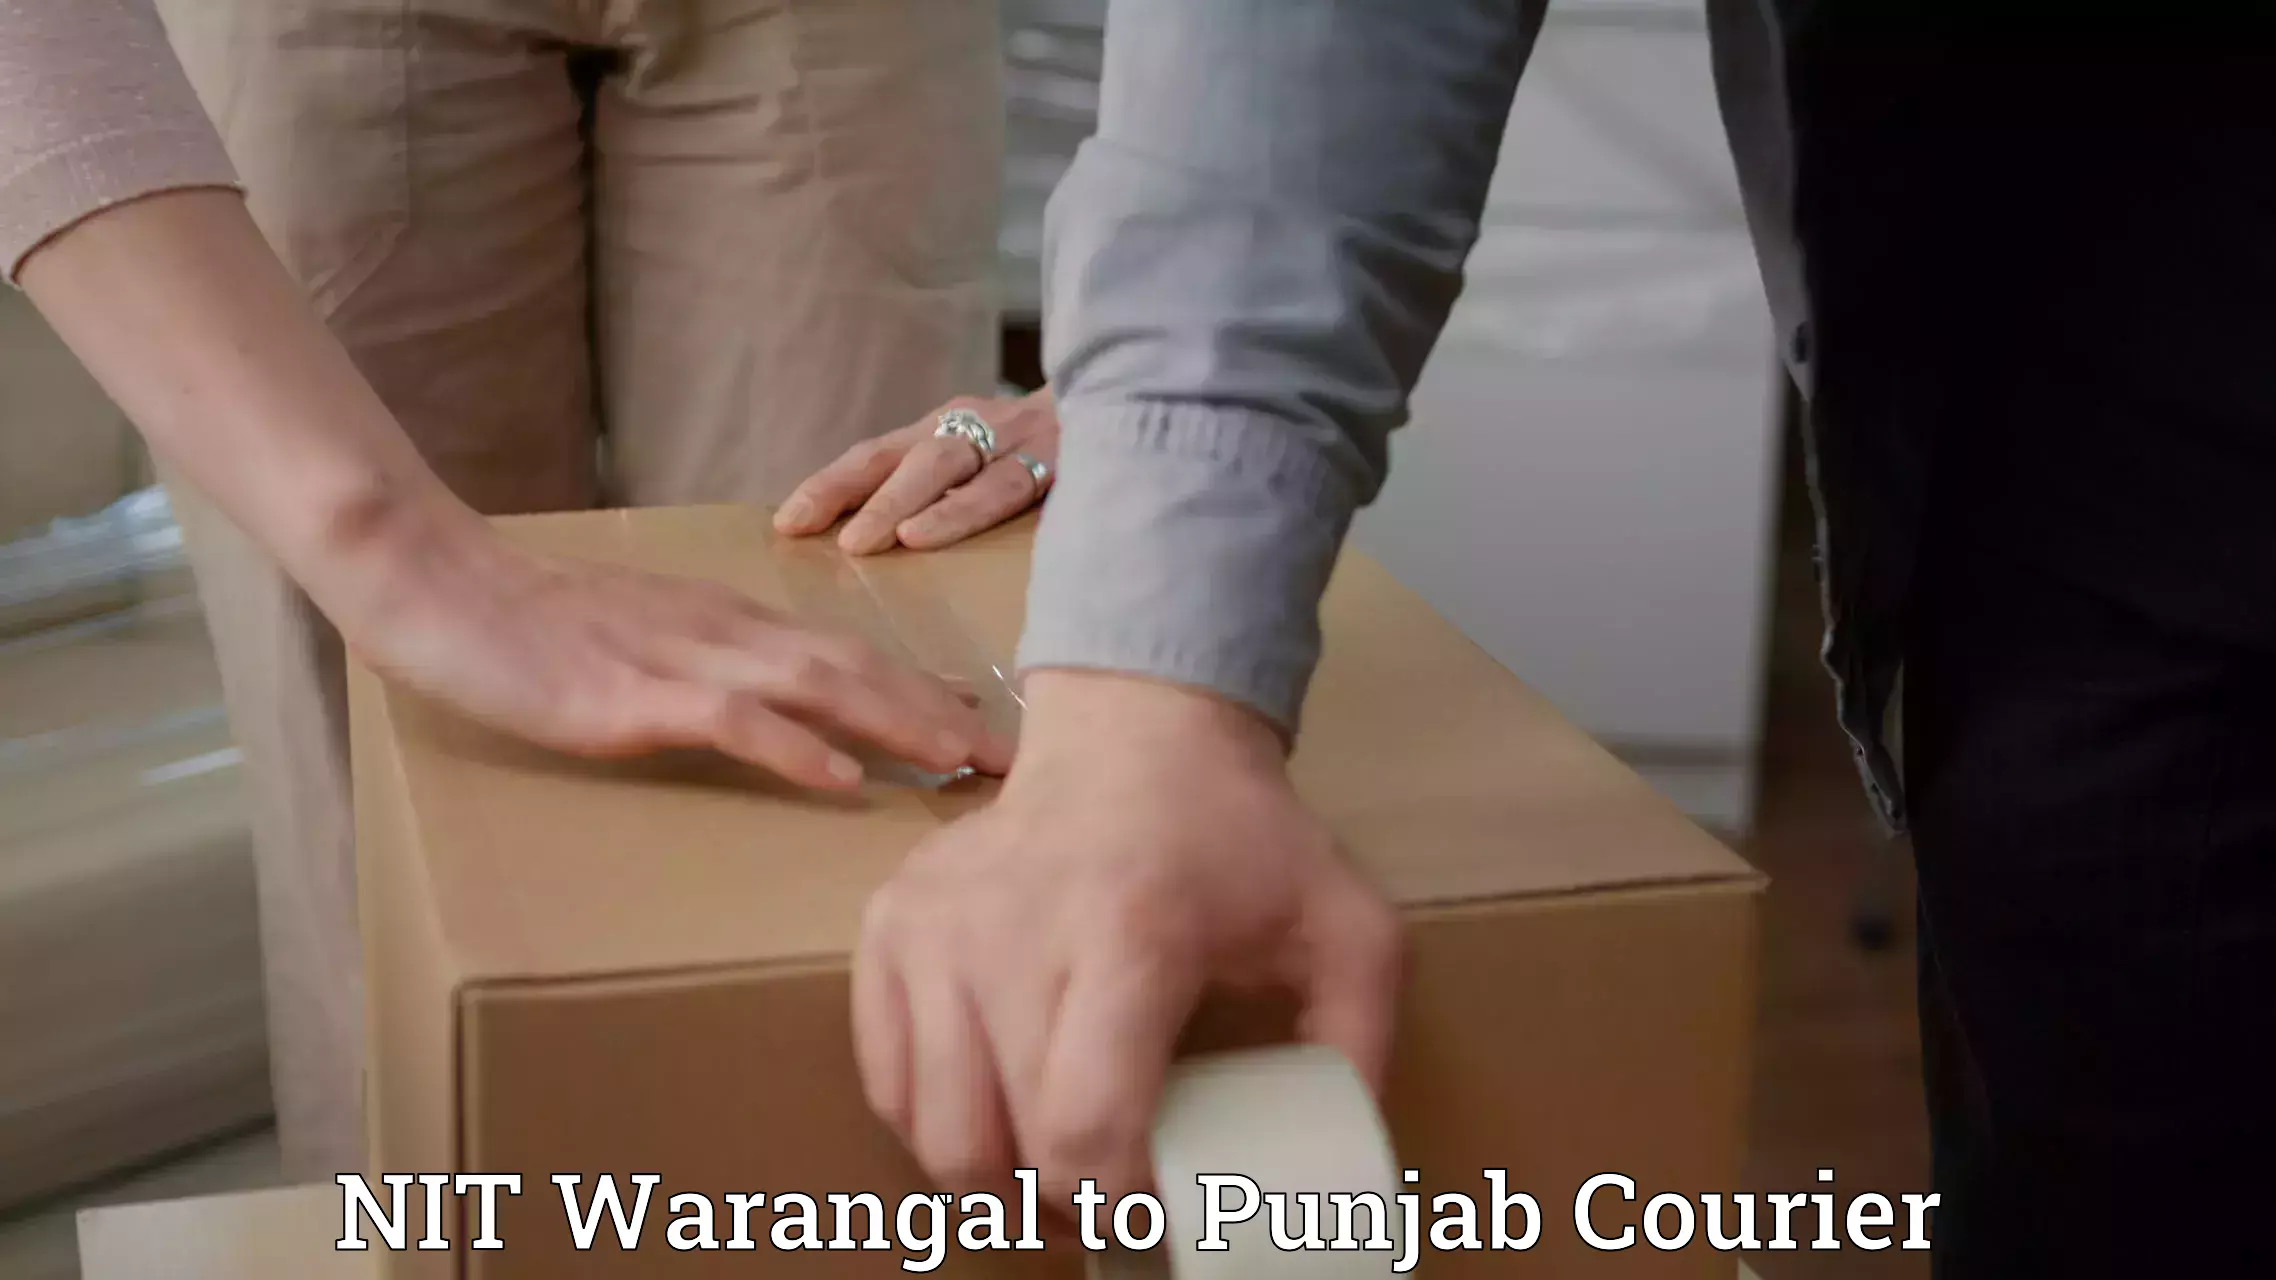 Professional courier services in NIT Warangal to Punjab